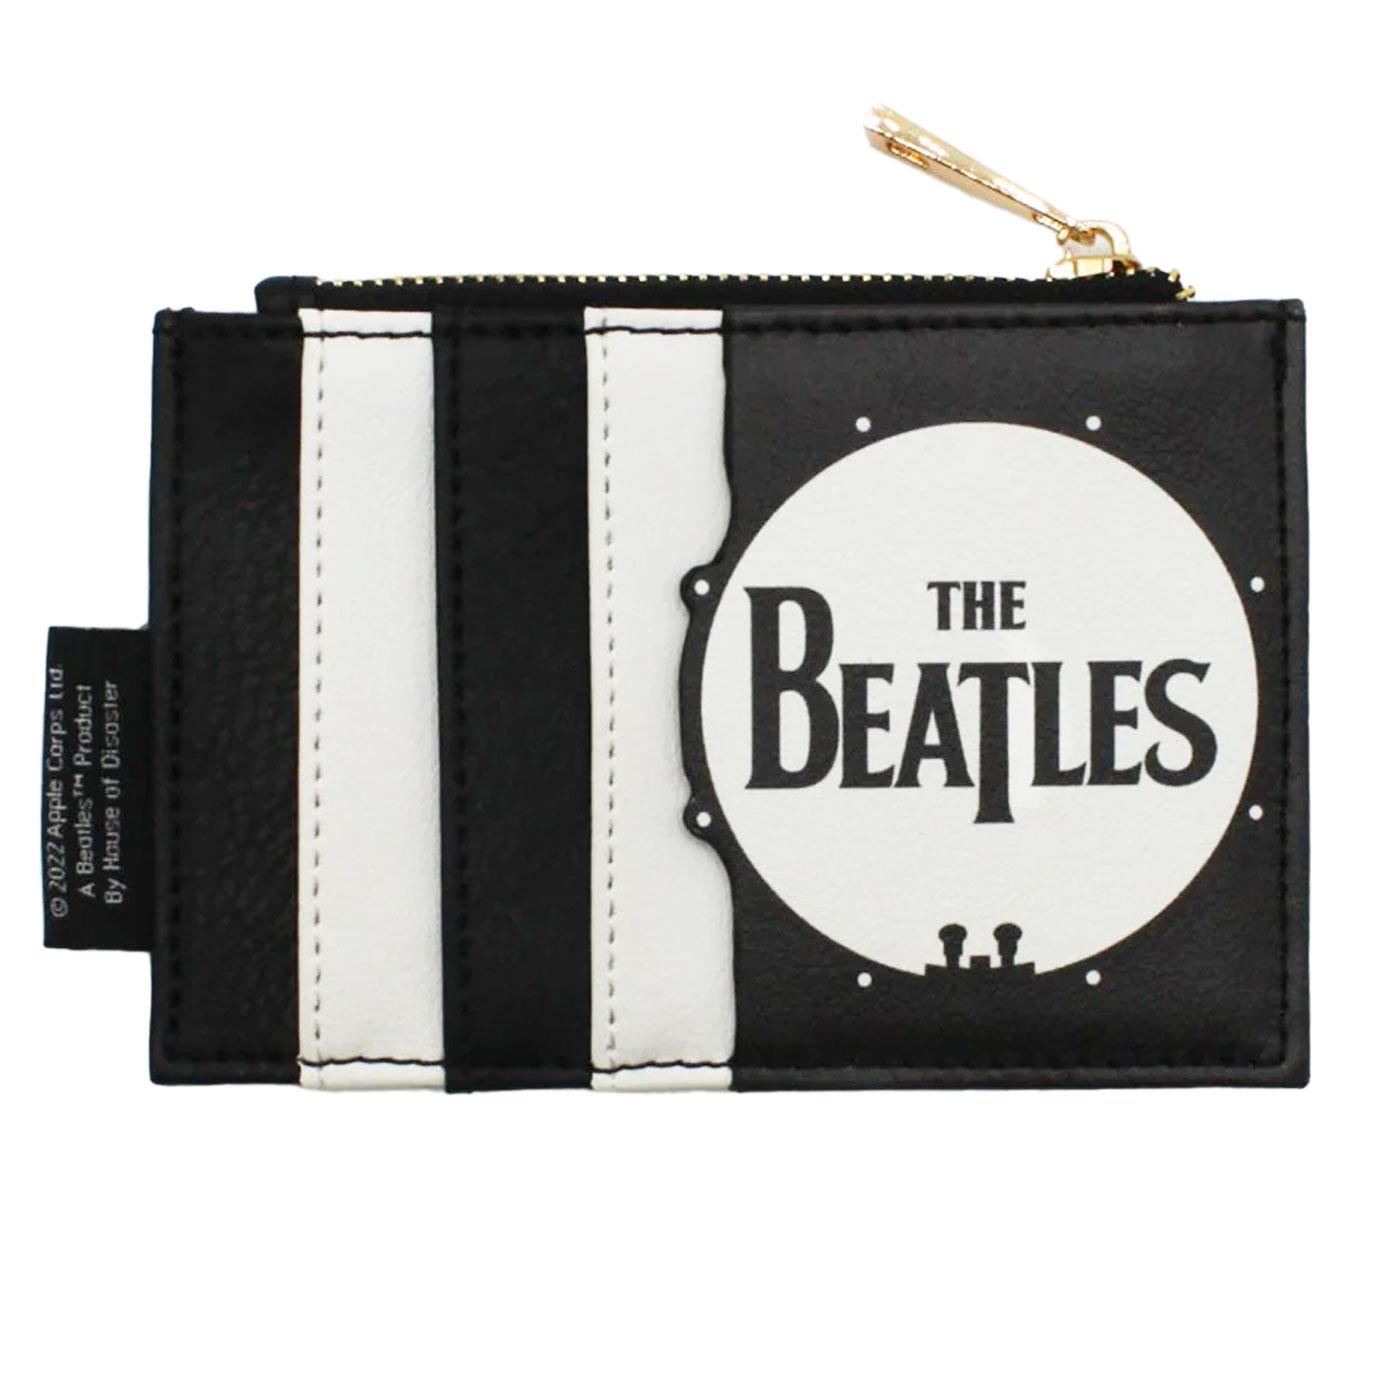 The Beatles Abbey Road Zip Purse in Black/White